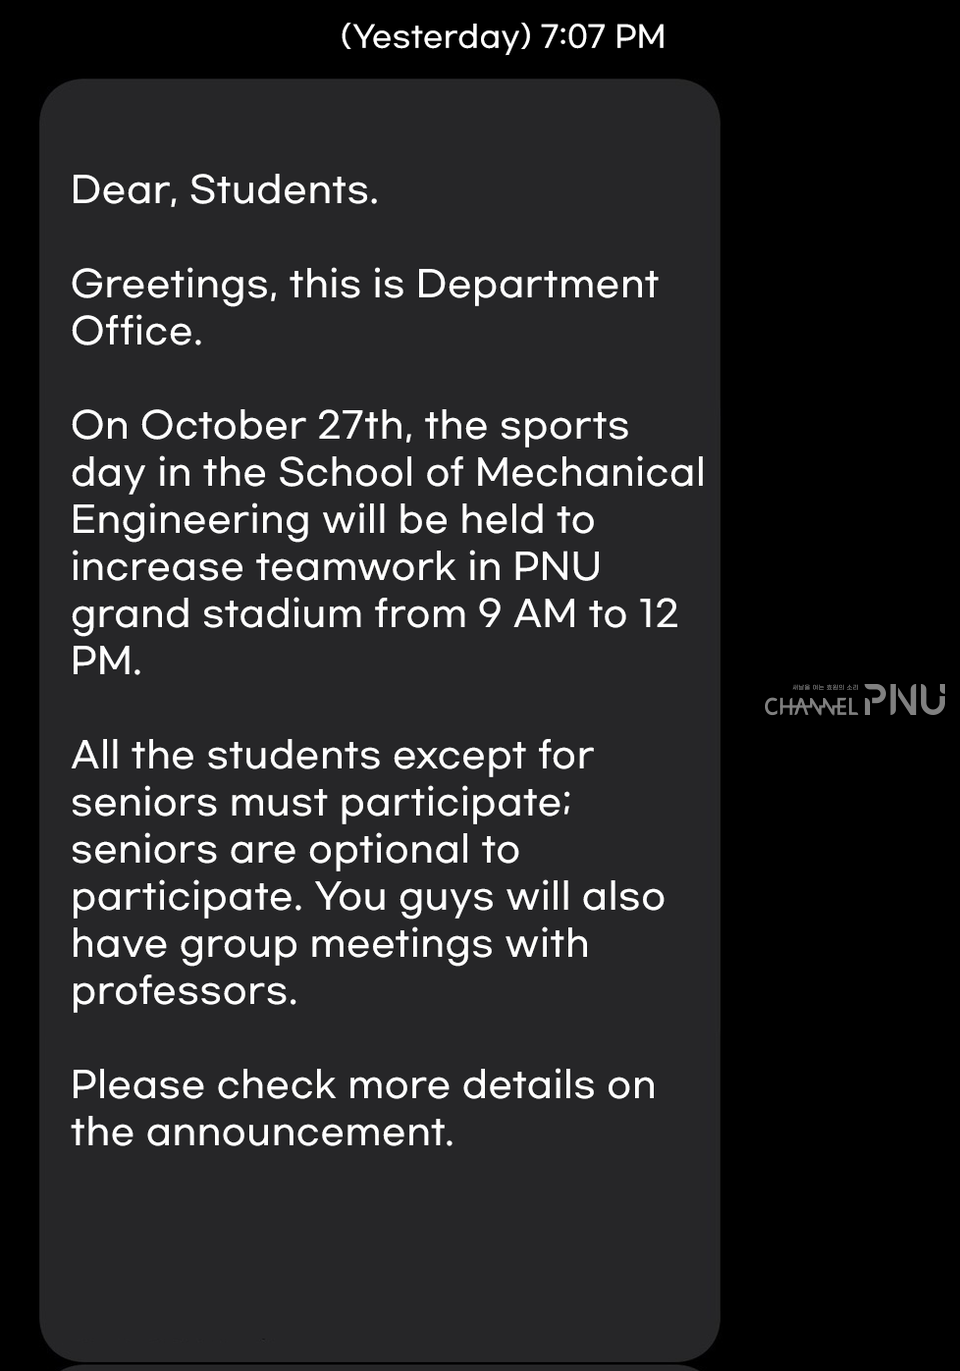 Group messages were sent to the Dept. of Mechanical Engineering students on October 20th. [Provided by Interviewee]